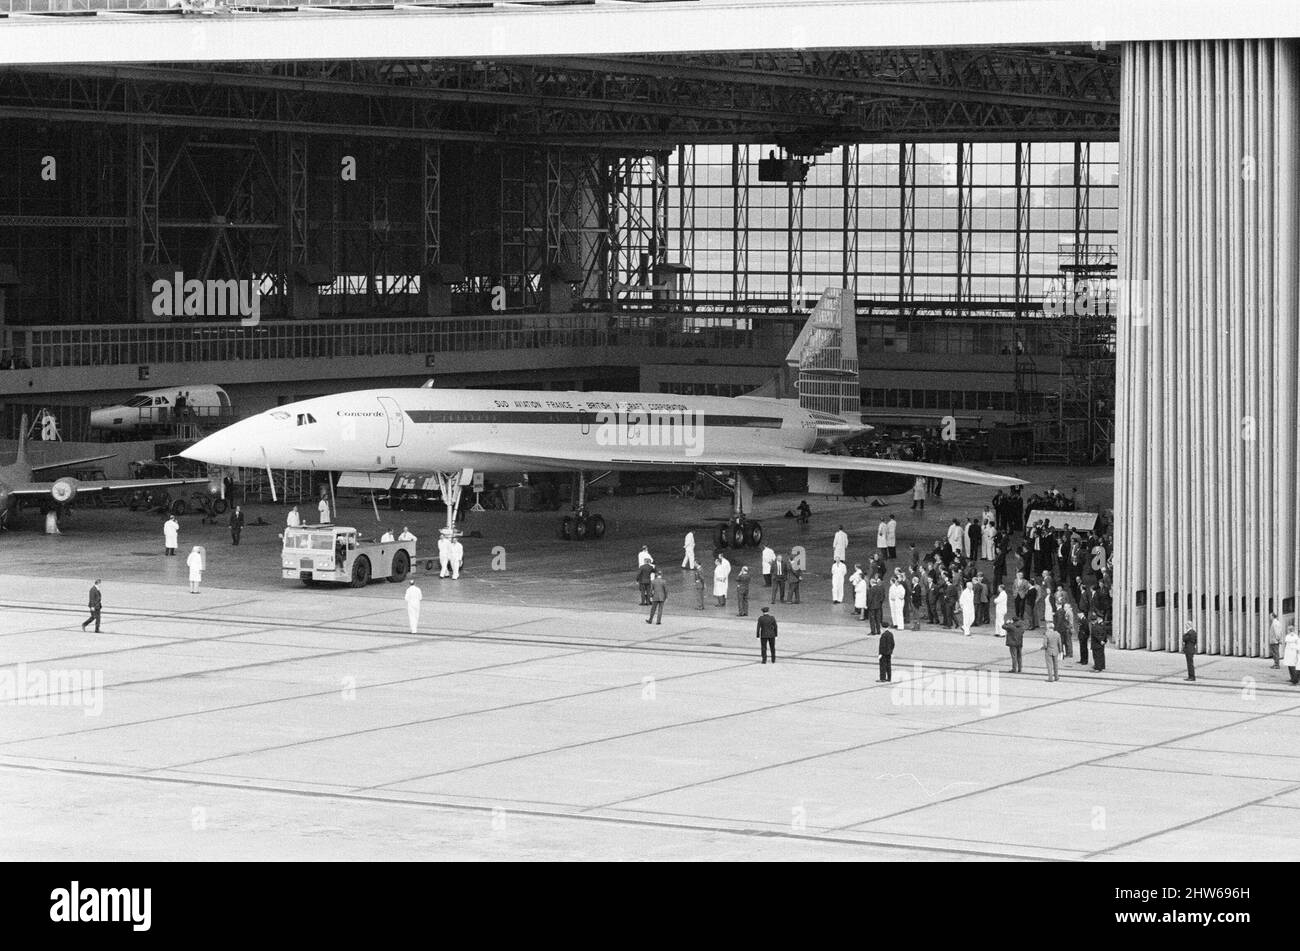 Concorde prototype 002 makes its first official public appearance in ...